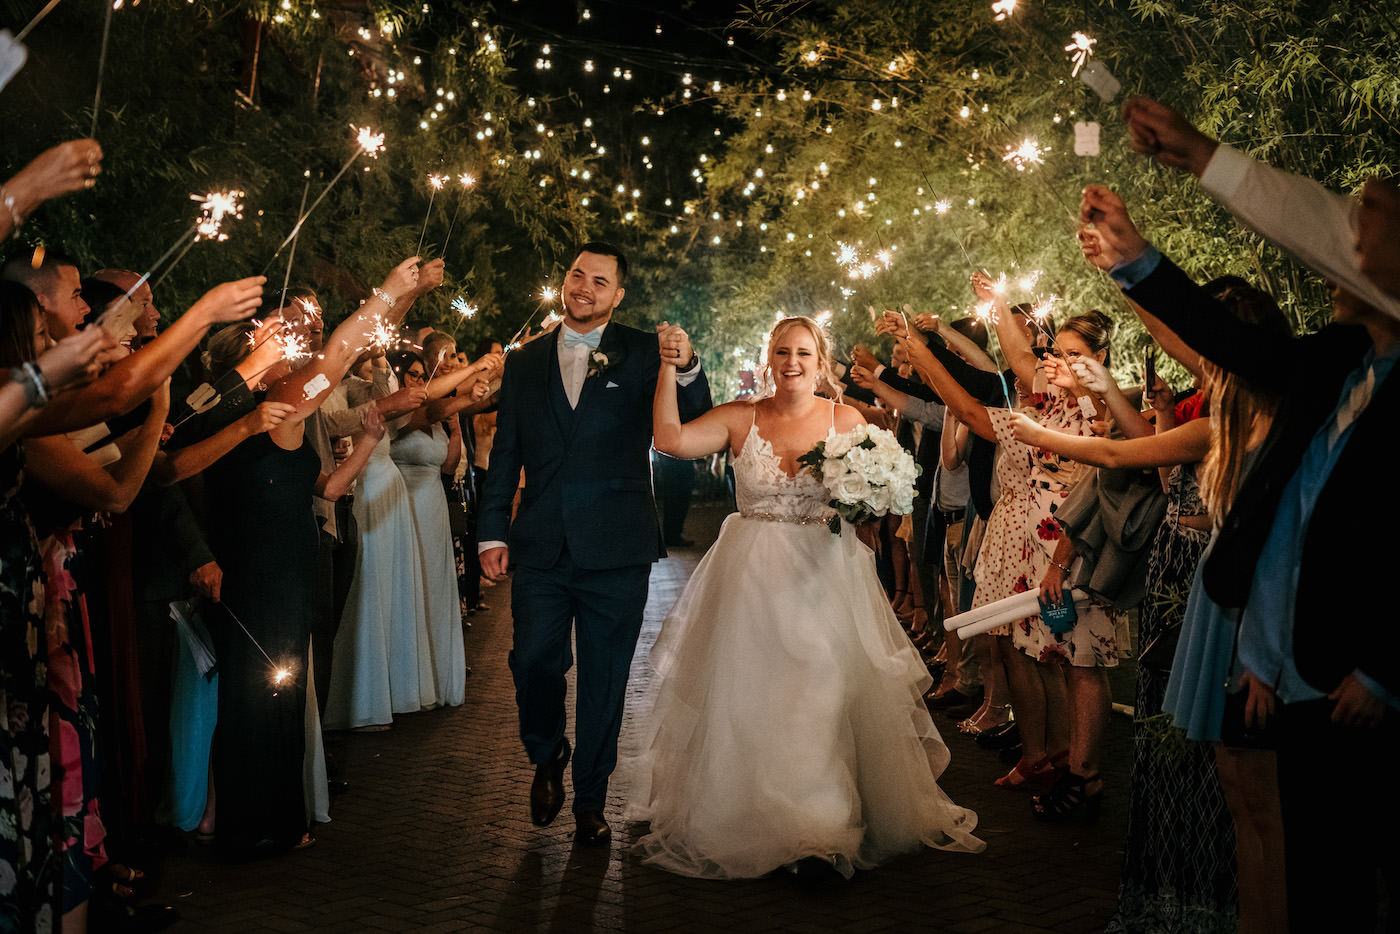 Tampa Bay Bride and Groom Whimsical Sparkler Wedding Exit in Bamboo Courtyard | Florida Wedding Photographer Bonnie Newman Creative | Downtown St. Pete Unique Wedding Venue NOVA 535